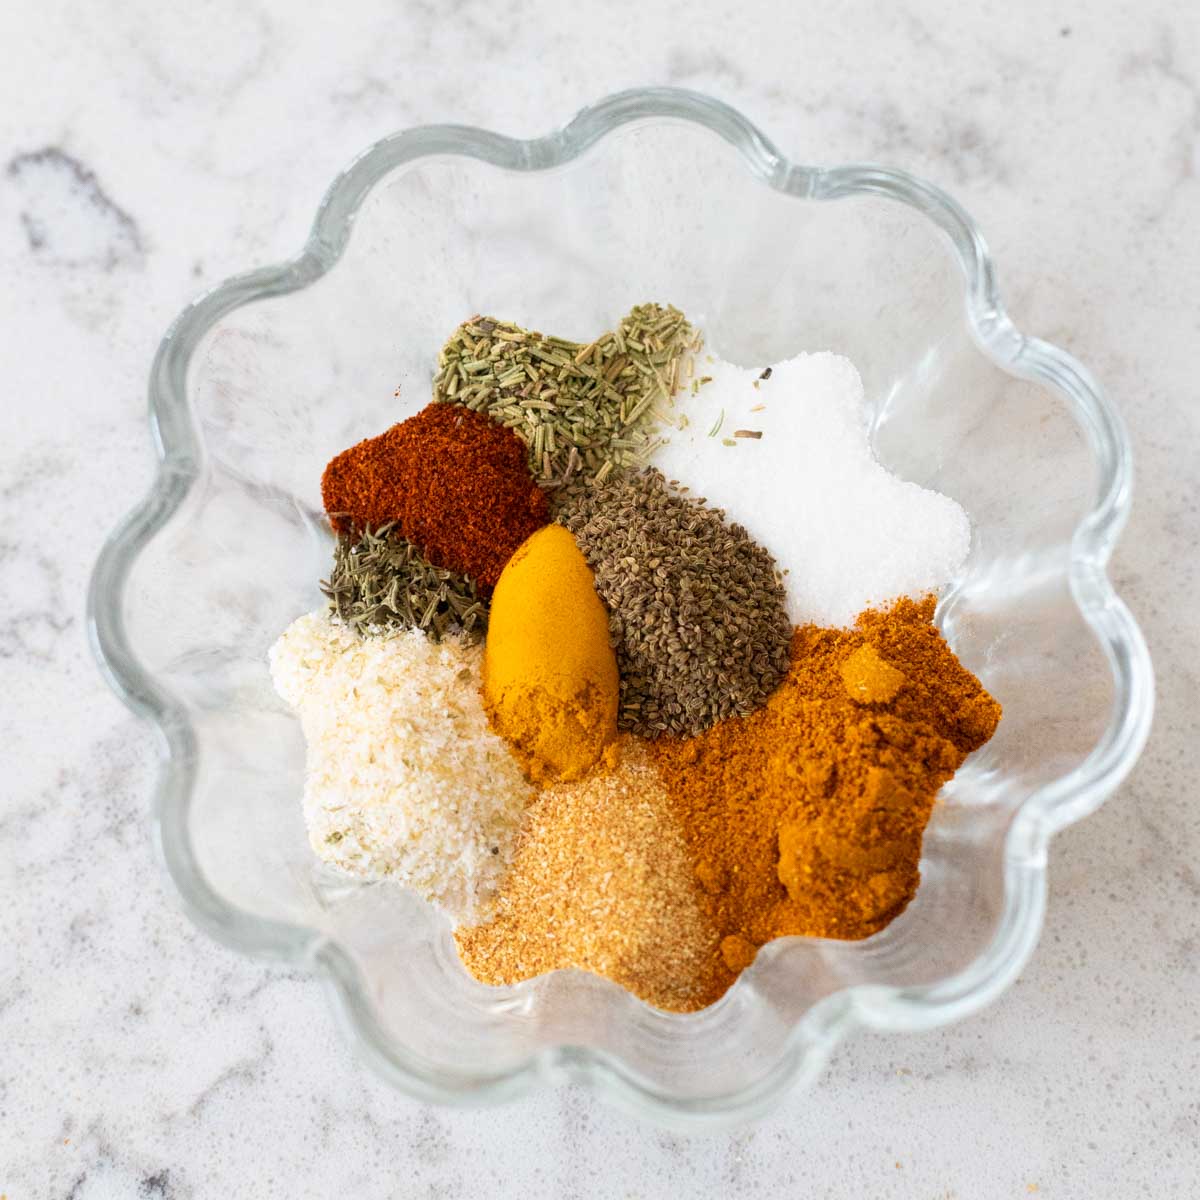 The individual spices have been measured and placed in a small bowl.